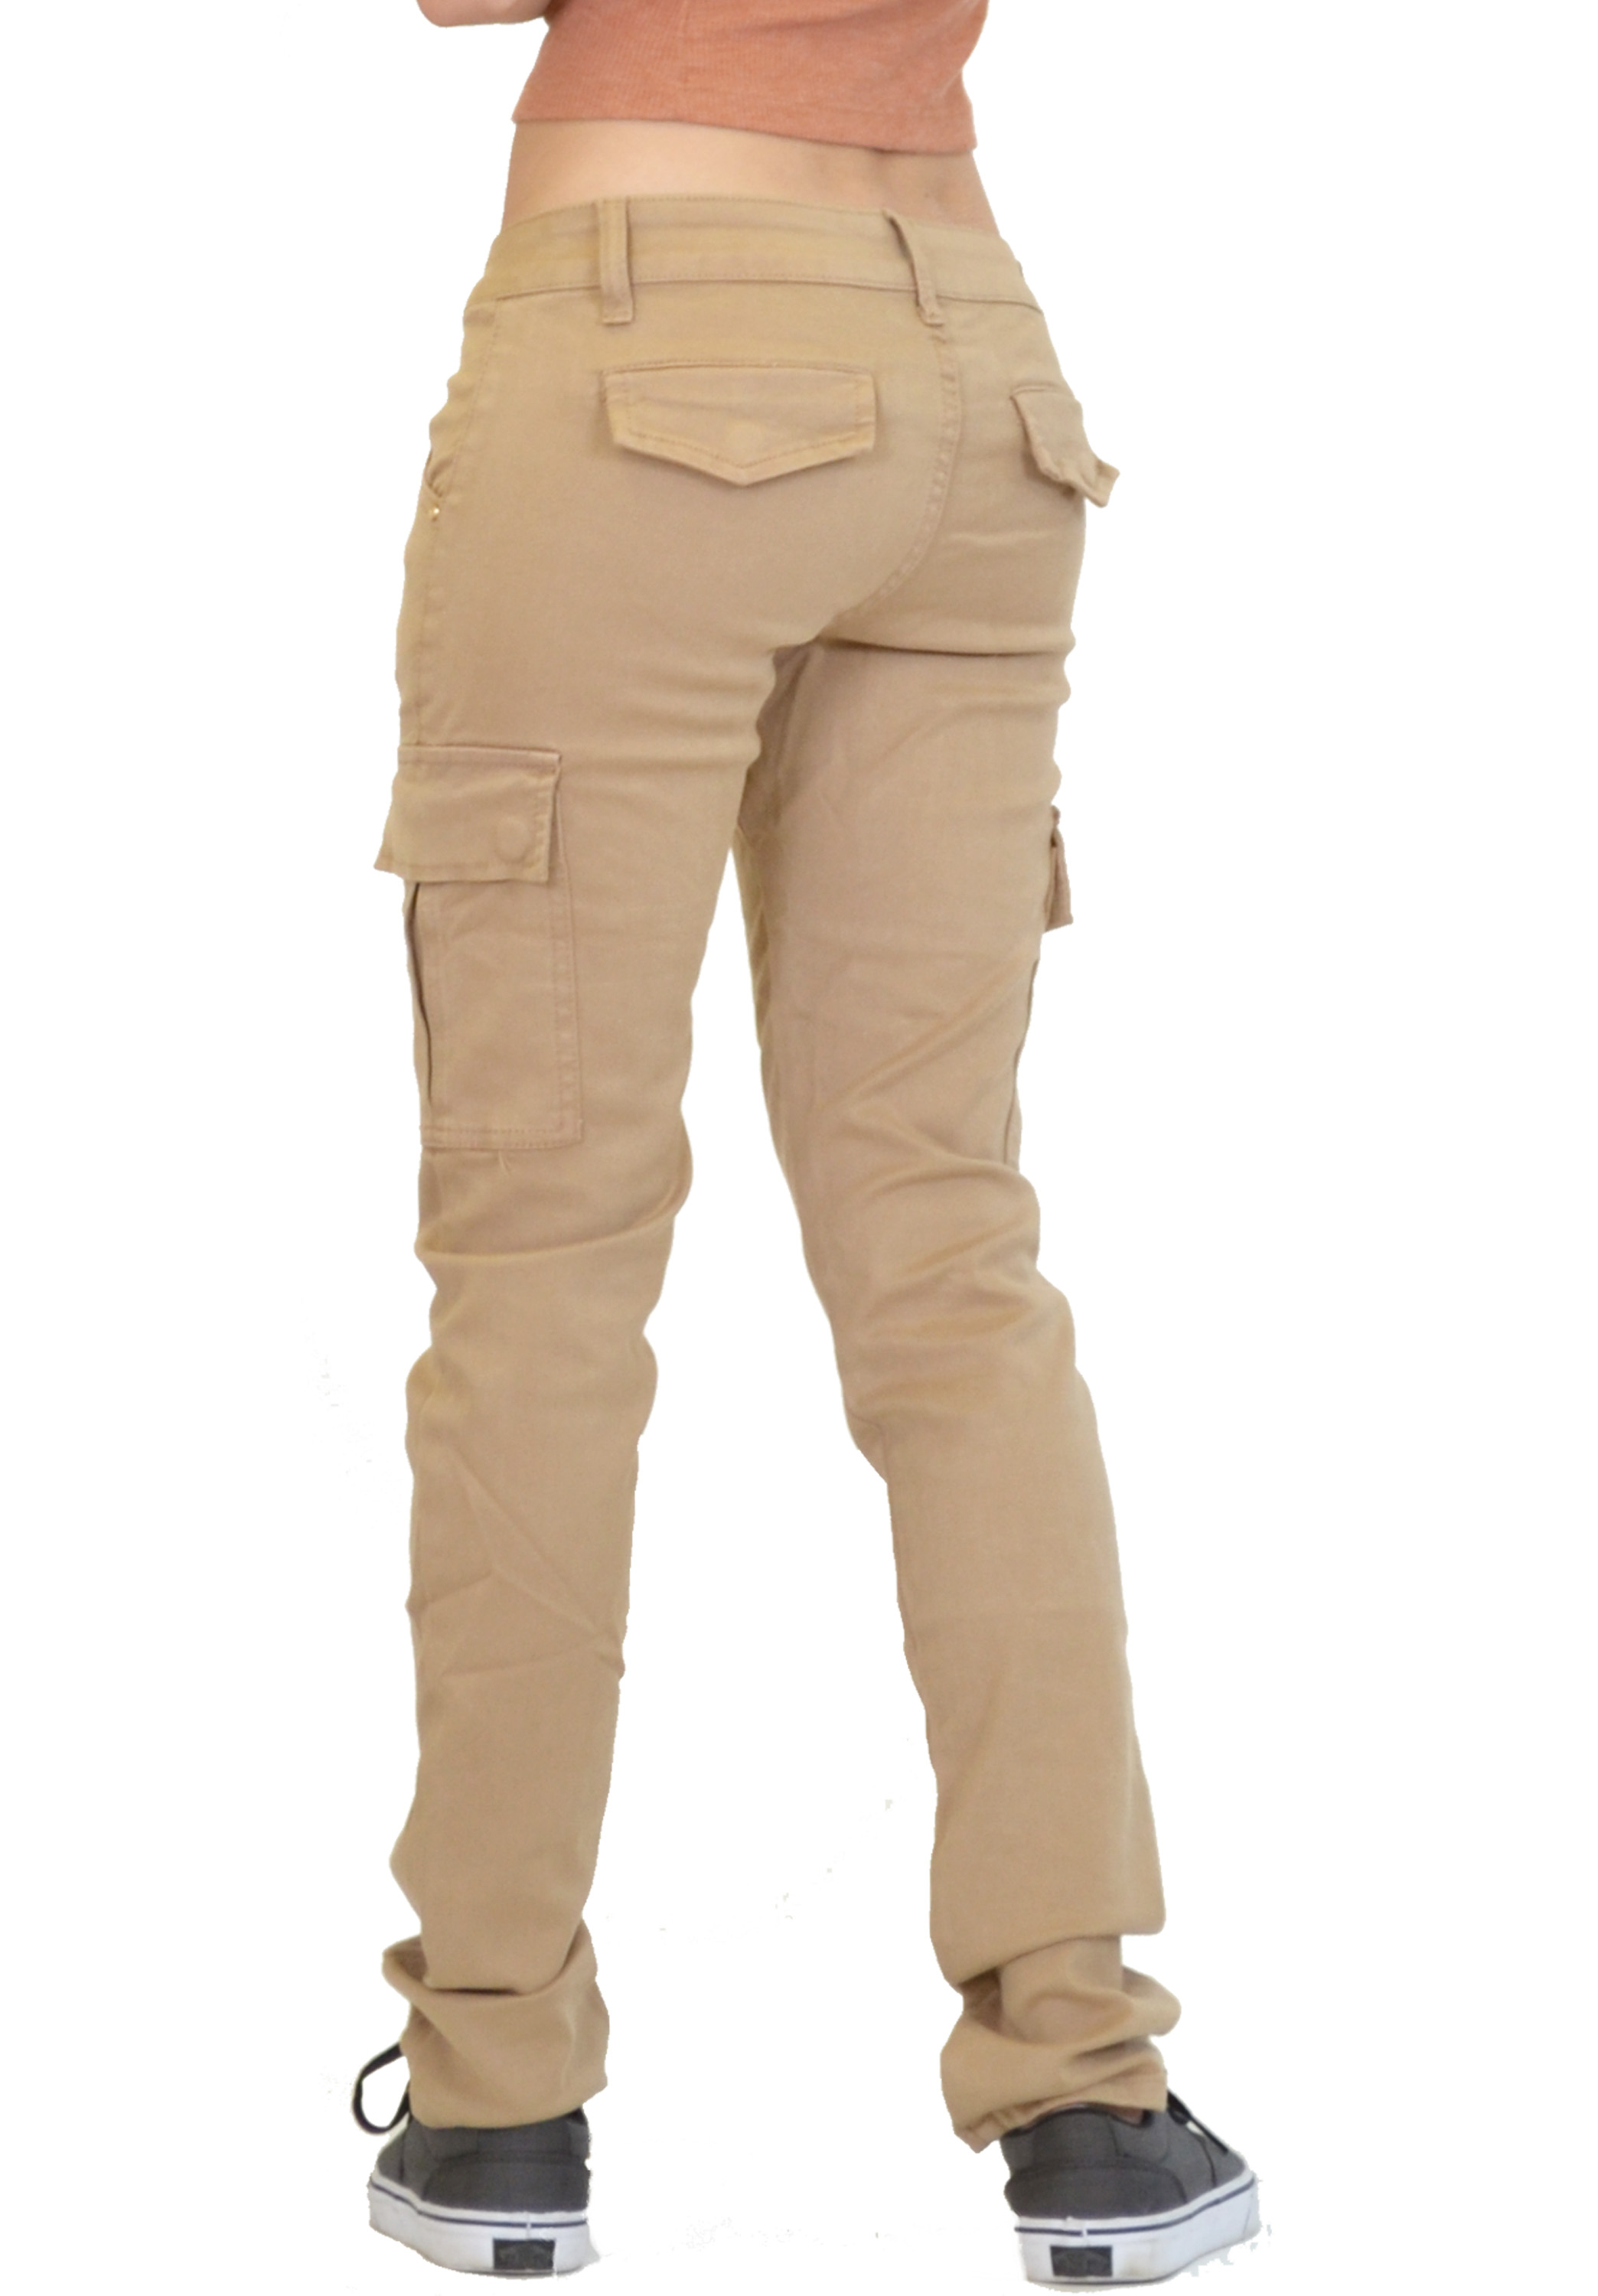 New Womens Ladies Slim Fitted Stretch Combat Jeans Pants Skinny Cargo Trousers Ebay